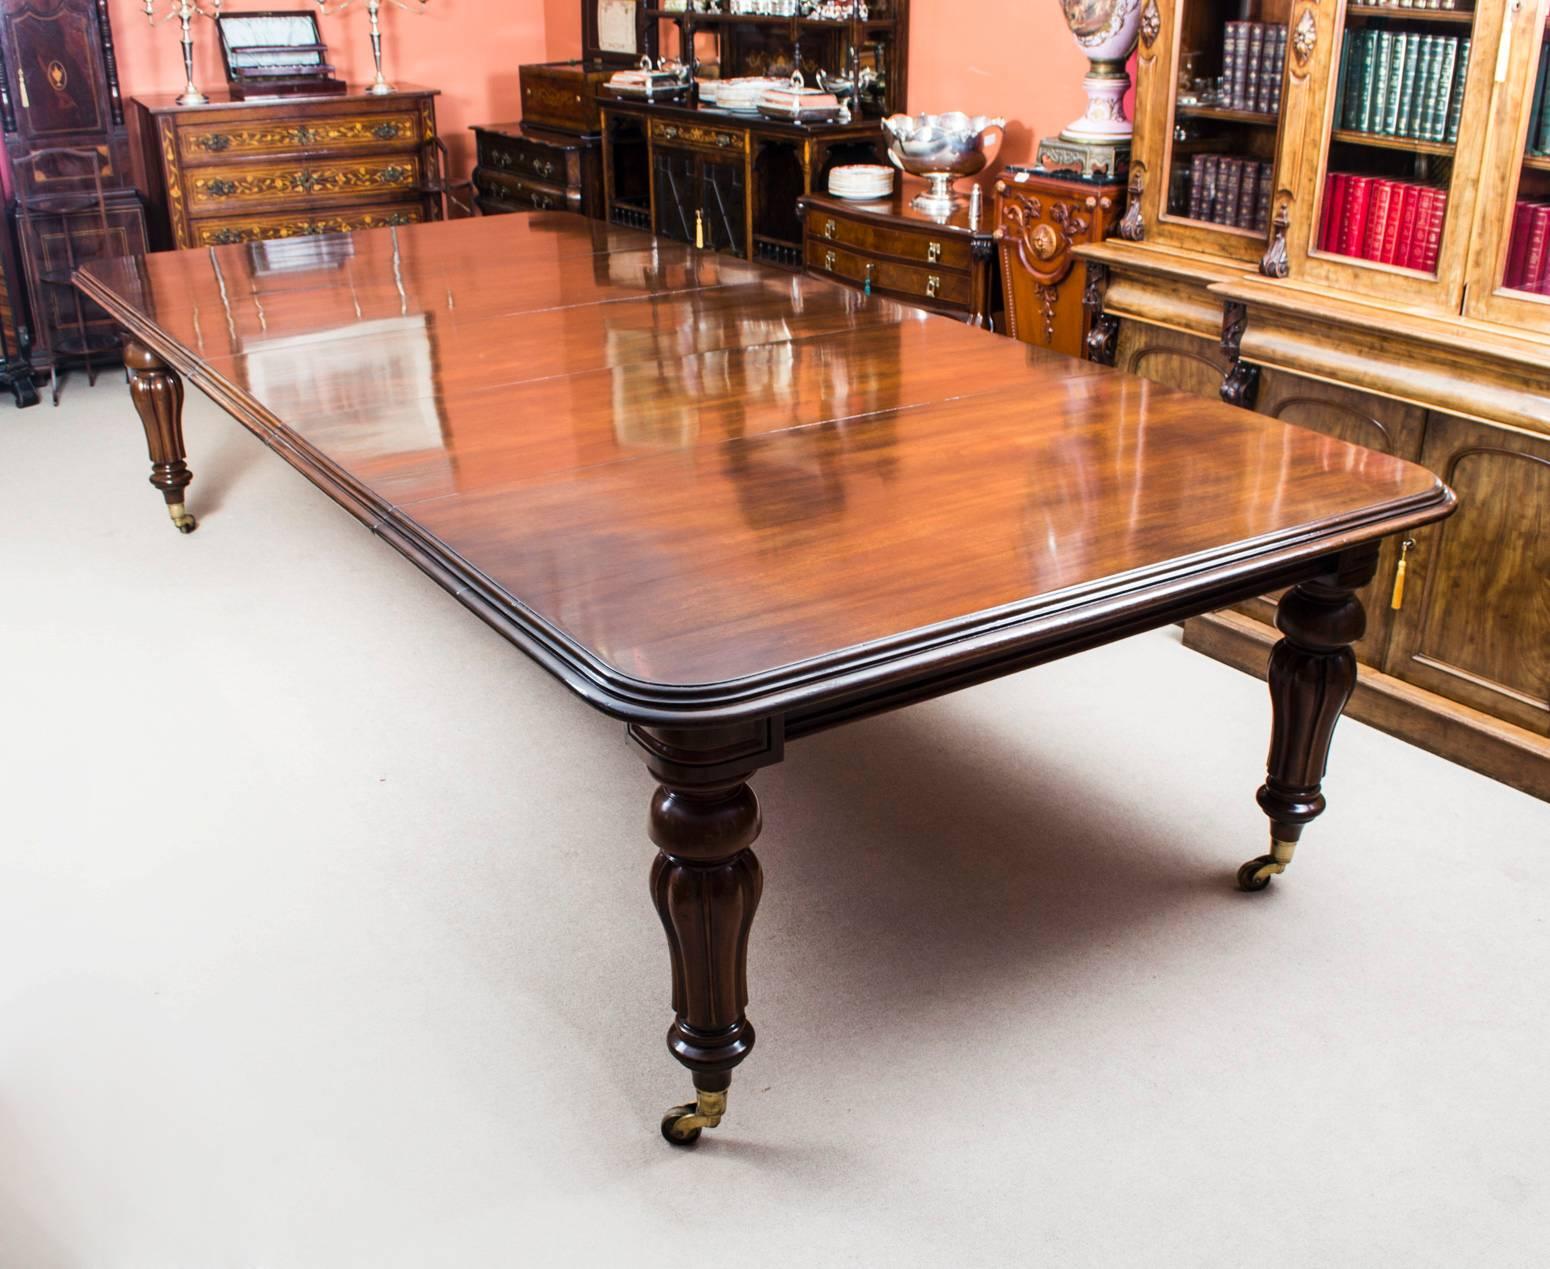 This is a fantastic dining set, comprising an antique early Victorian dining table 335cm, circa 1850 in date, bought on my last buying trip to Devon, offered with a set of 12 matching tulip back chairs.

This amazing table is in really excellent